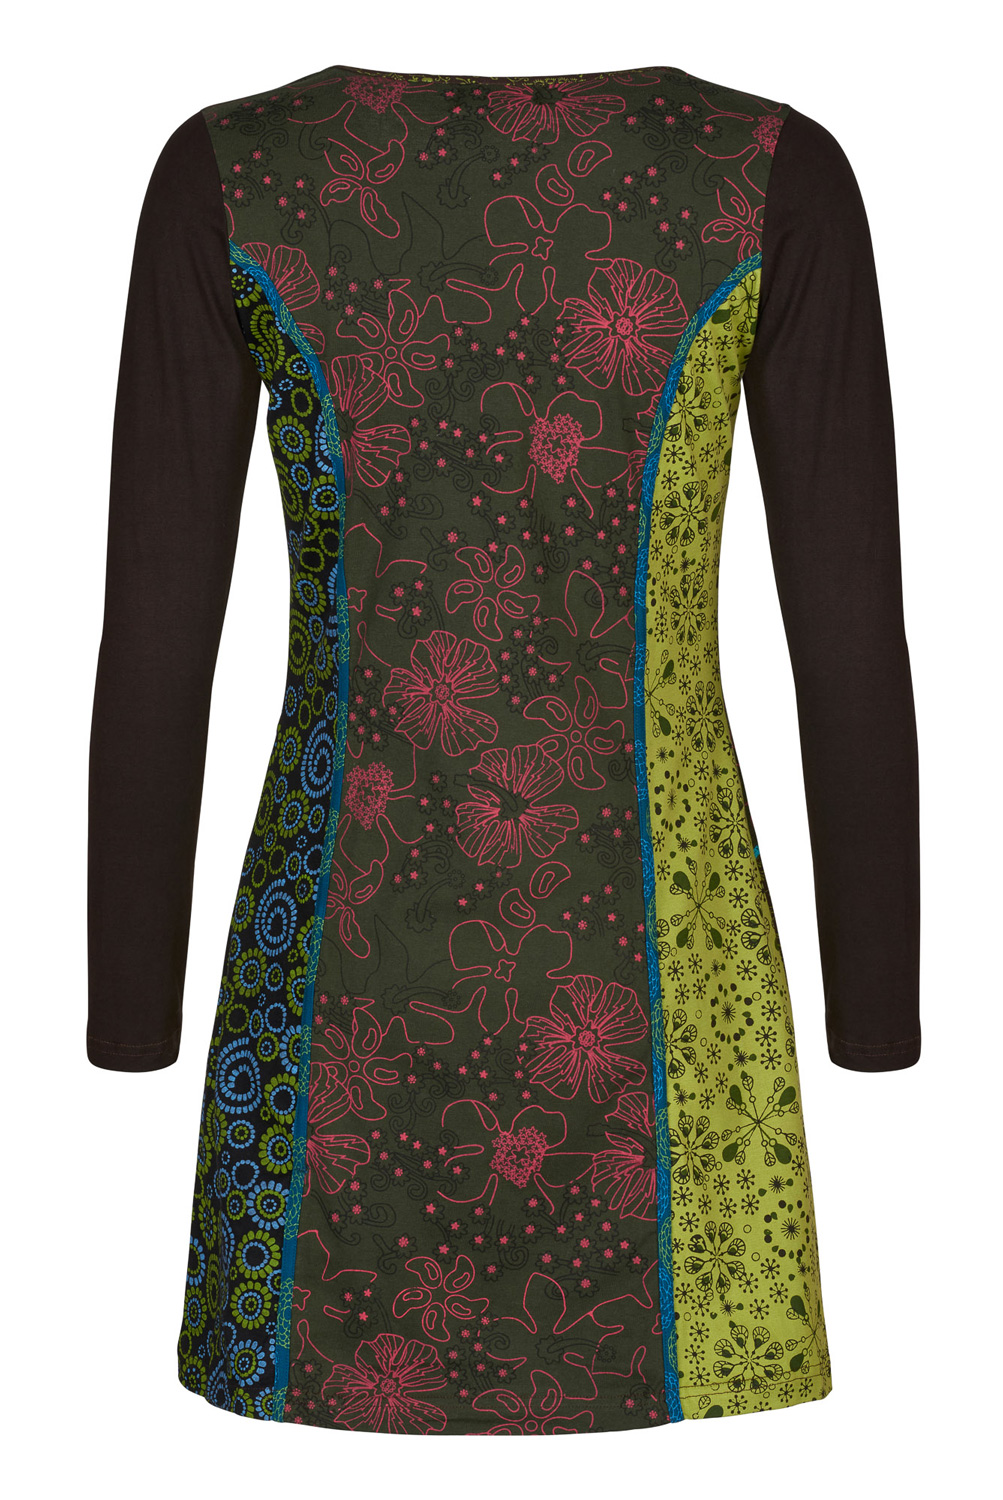 Wicked Dragon Clothing - Lotus print long sleeve patchwork dress